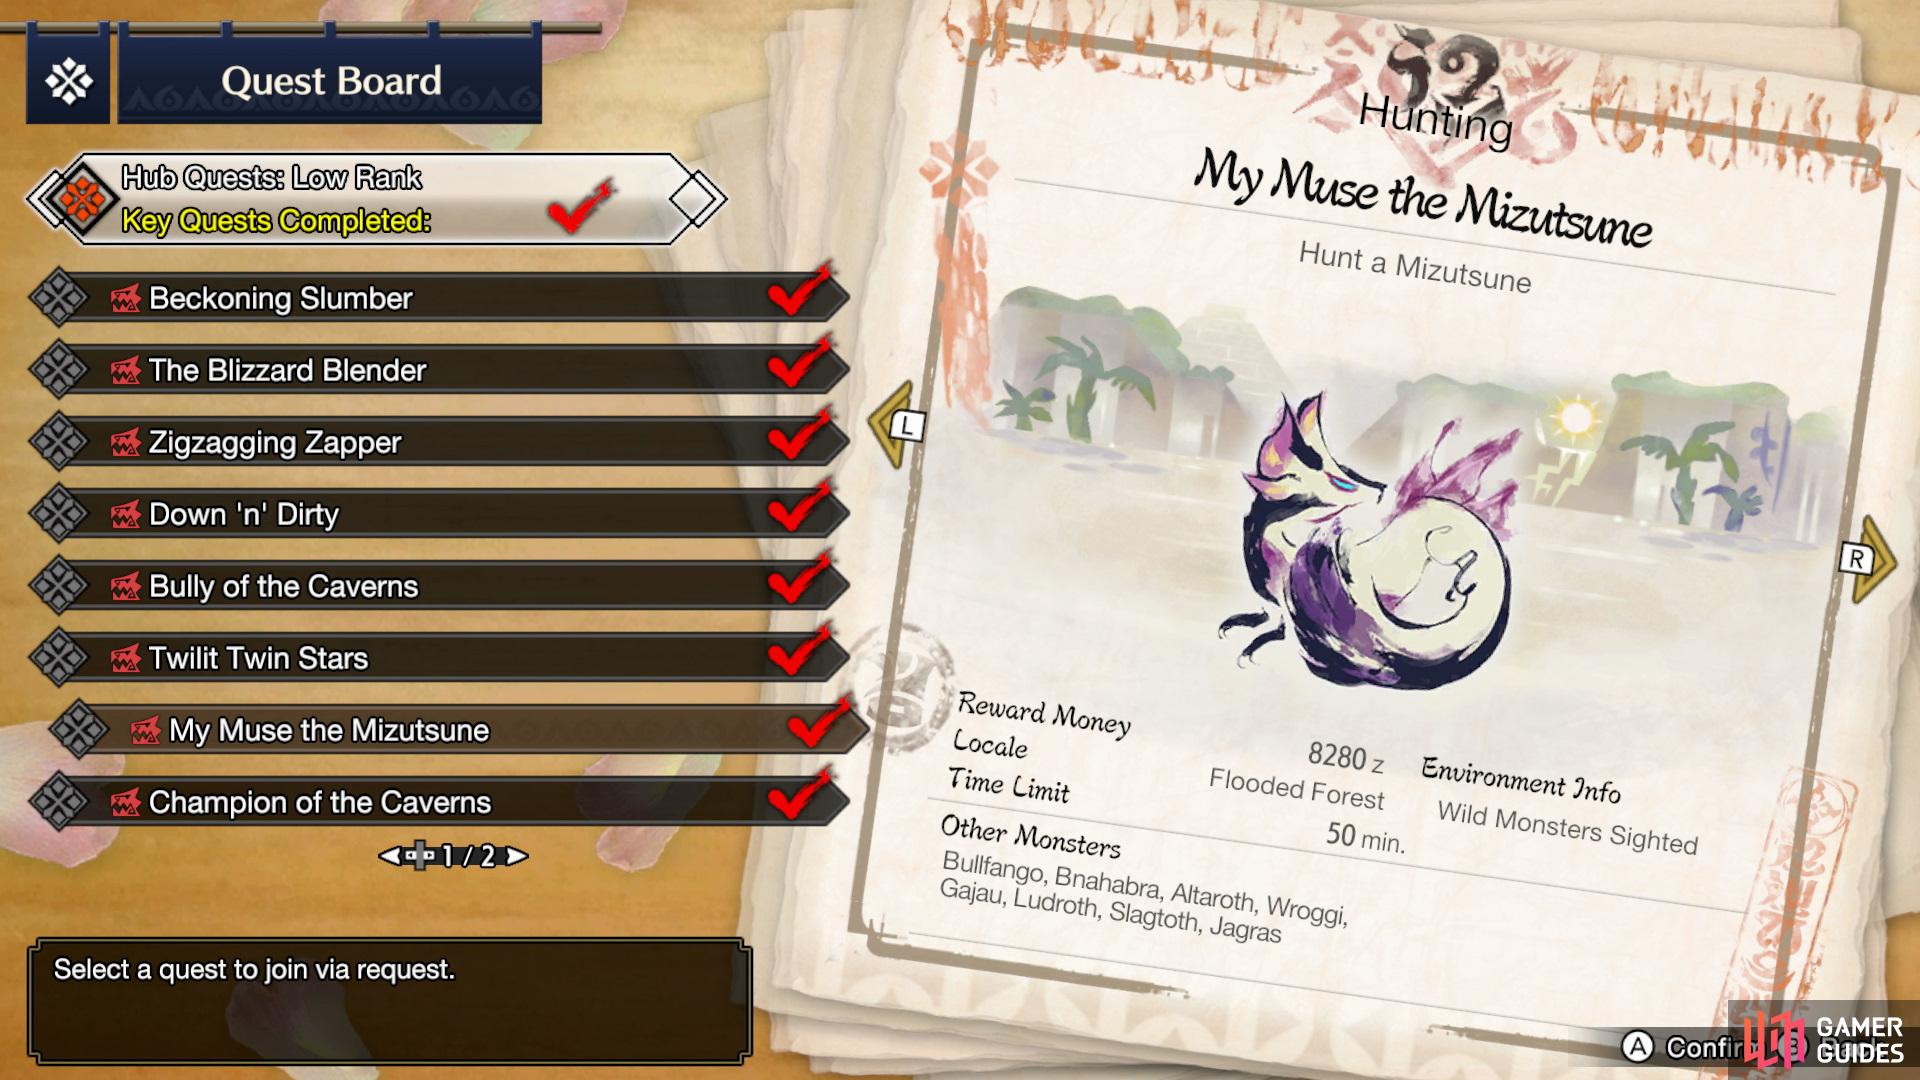 The My Muse the Mizutsune Quest  becomes available when you reach 3* Hub Quests.